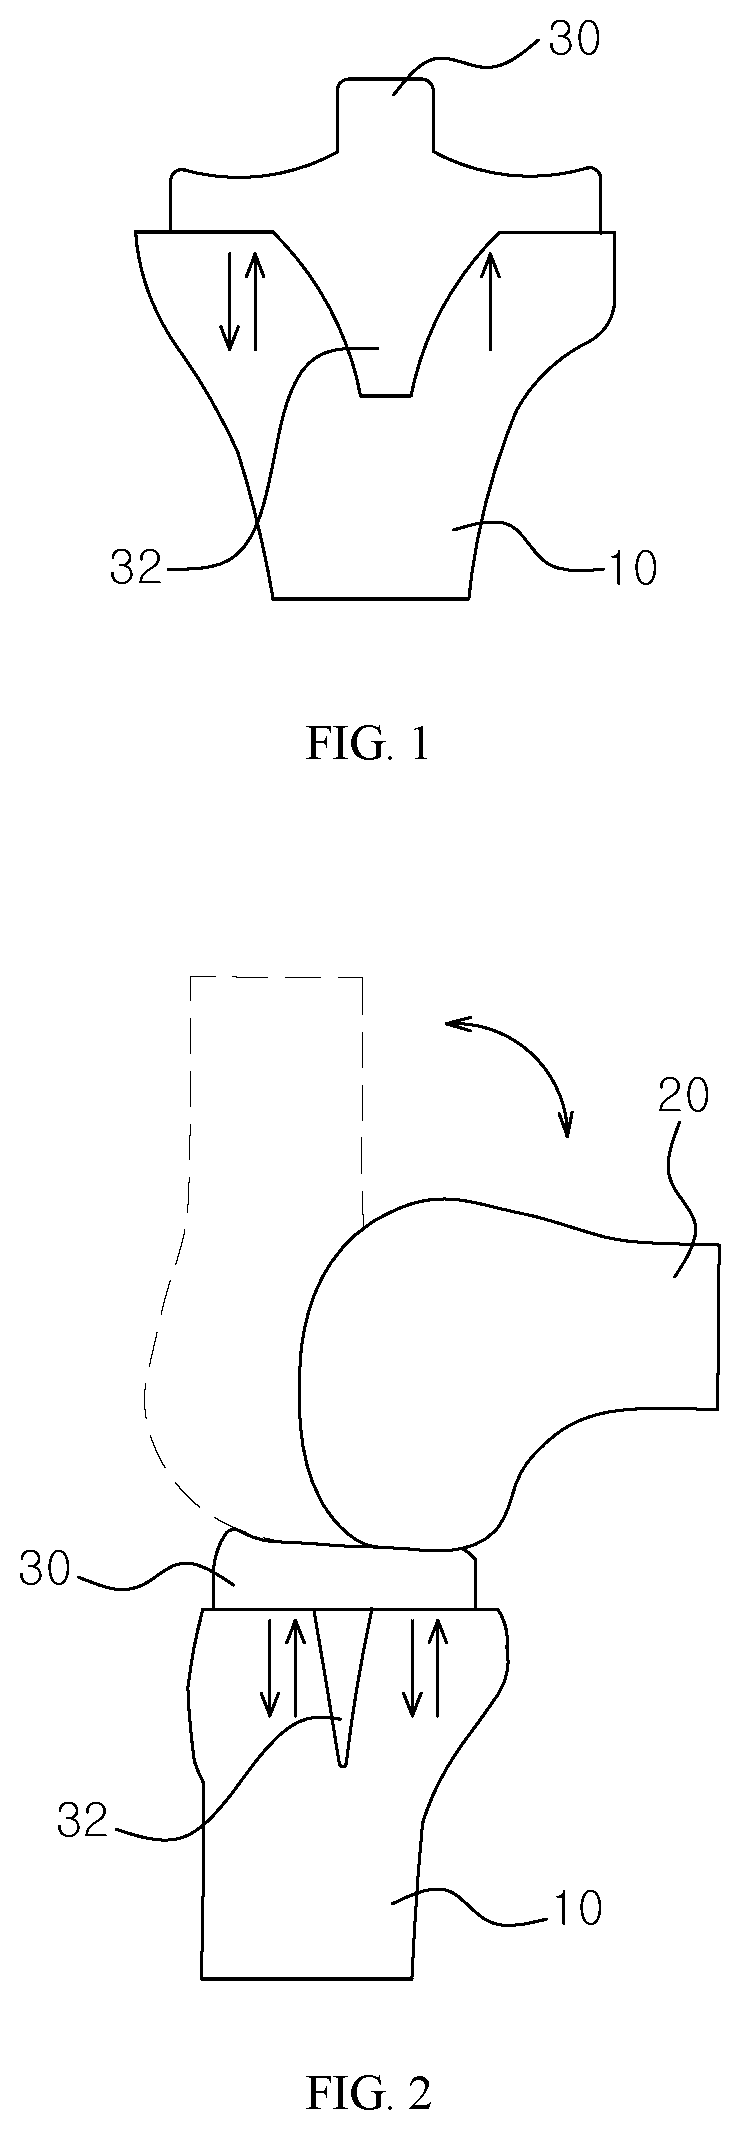 Resection guide, trial knee joint implant, and surgical instrument for knee arthroplasty